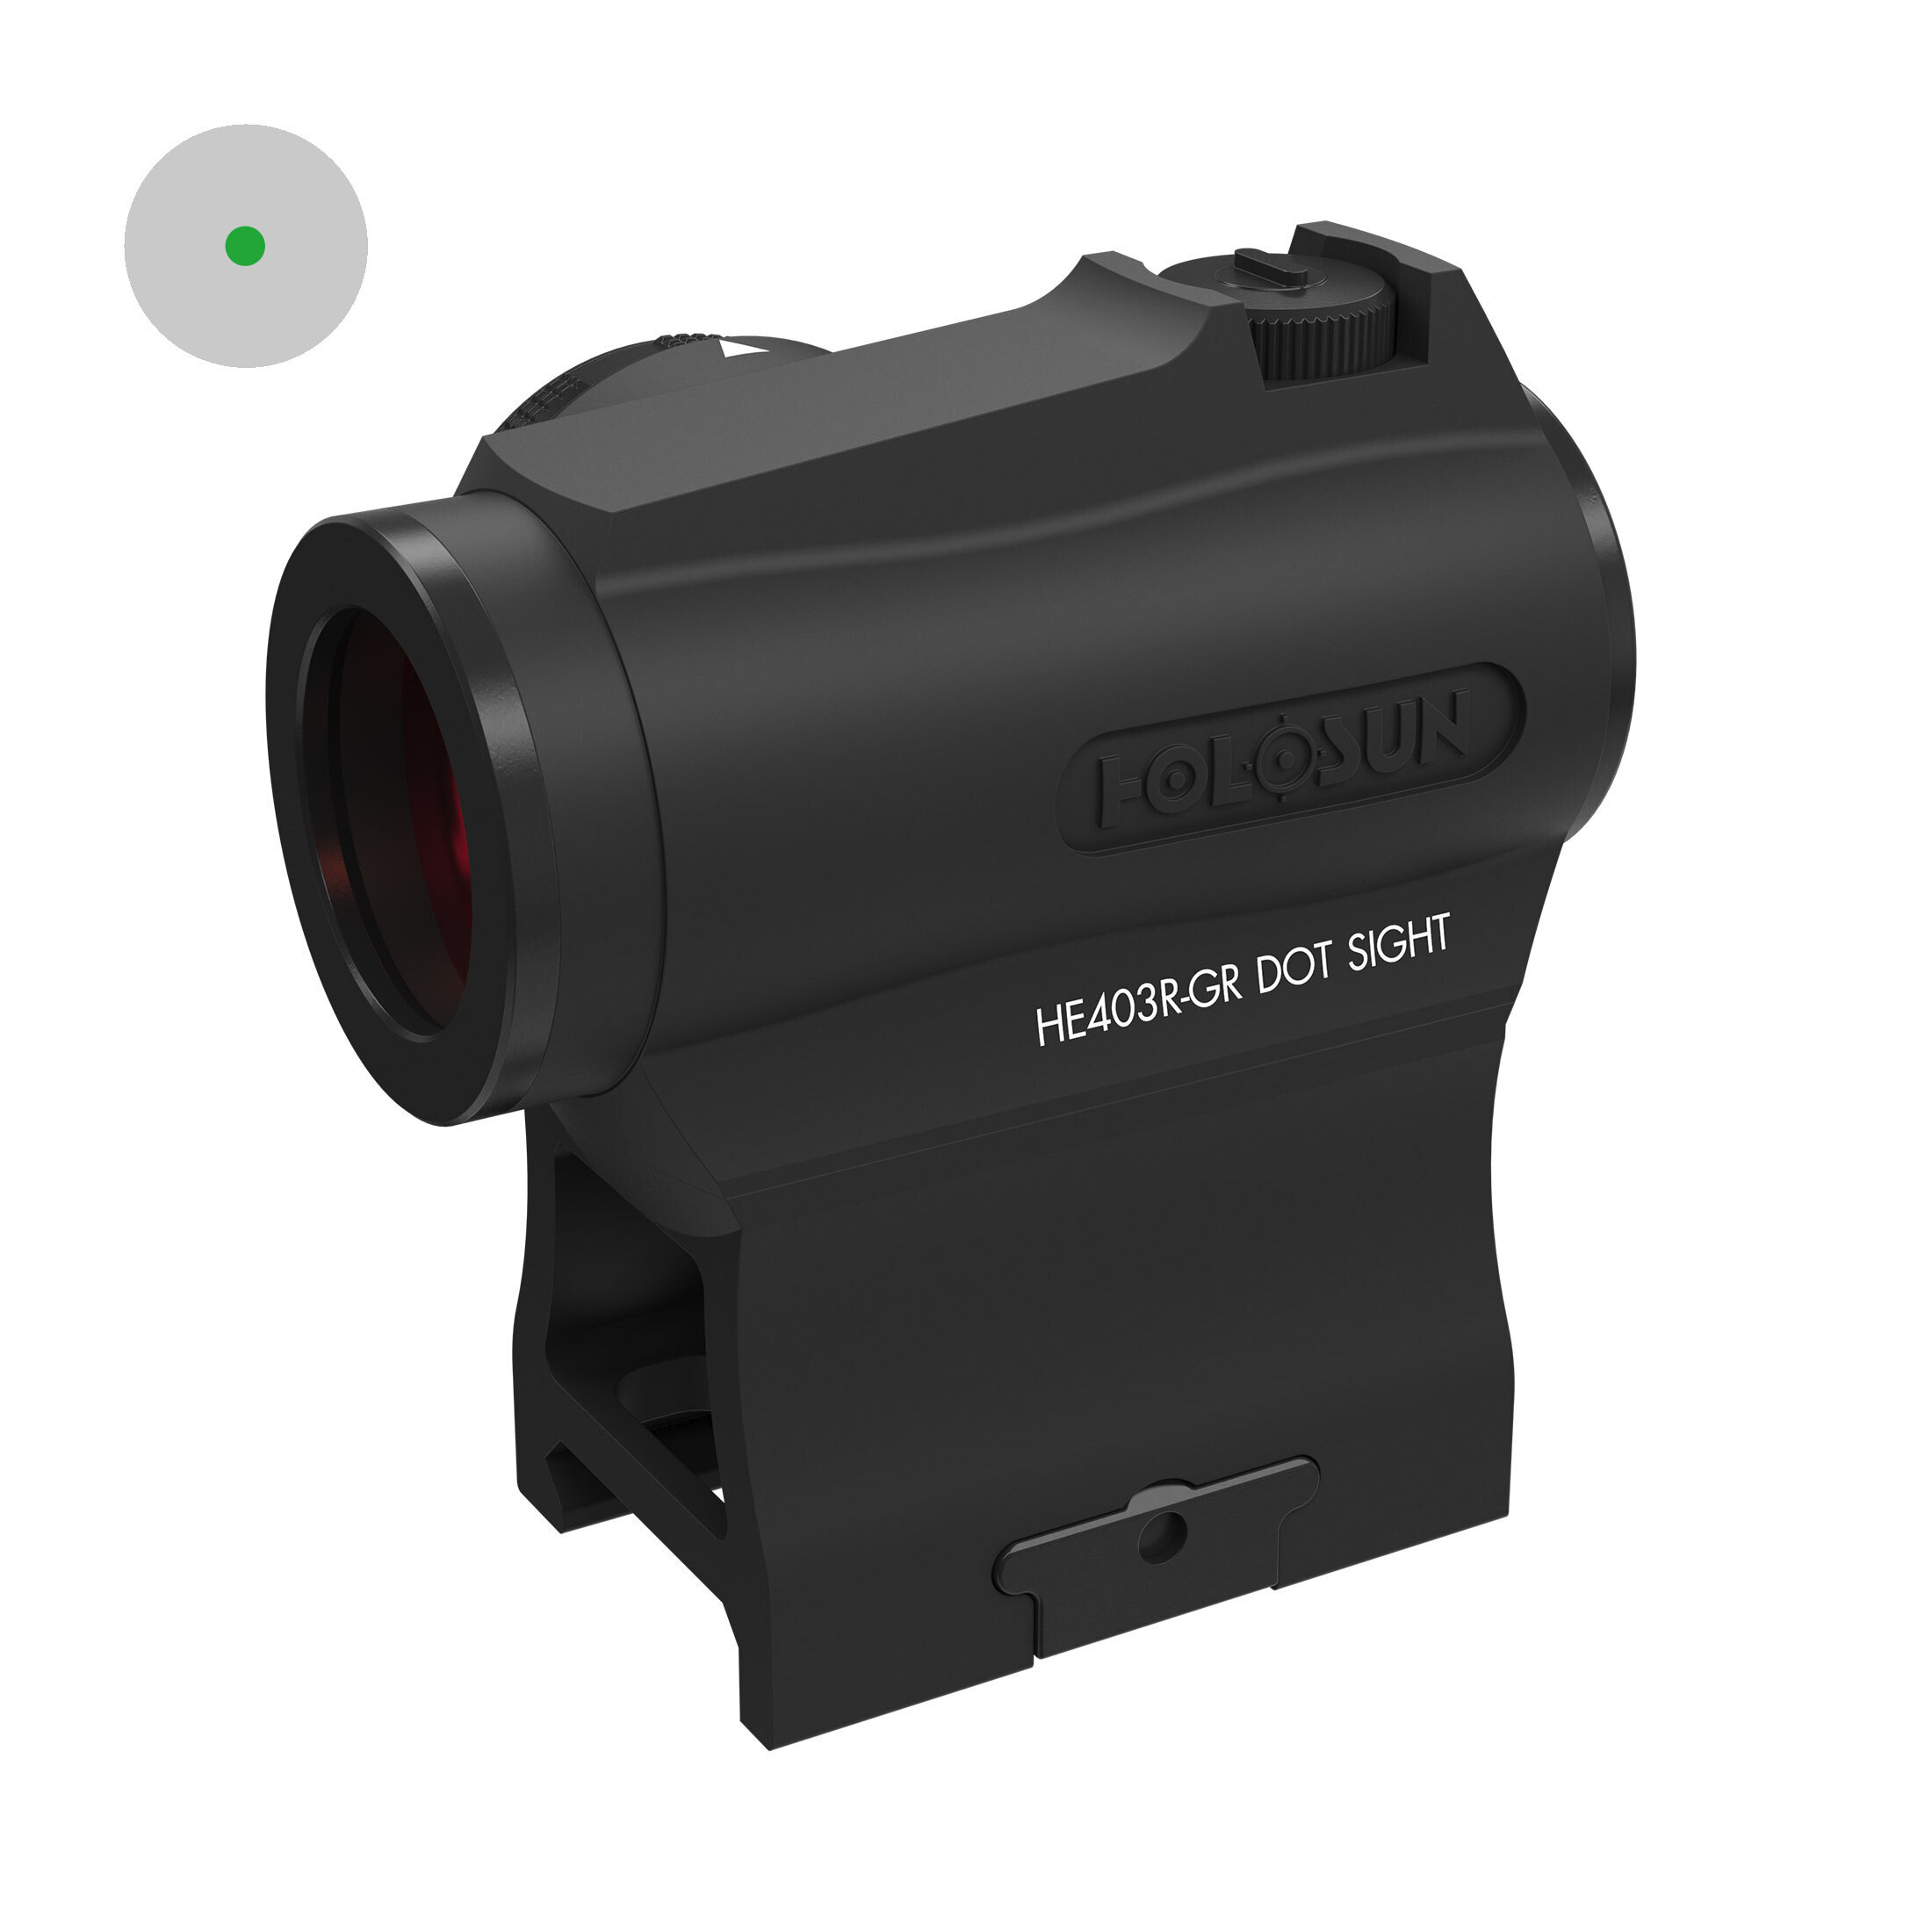 Holosun ELITE HE403R-GR Microdot green dot sight with 2MOA dot reticle, new rheostat dial to adjust…